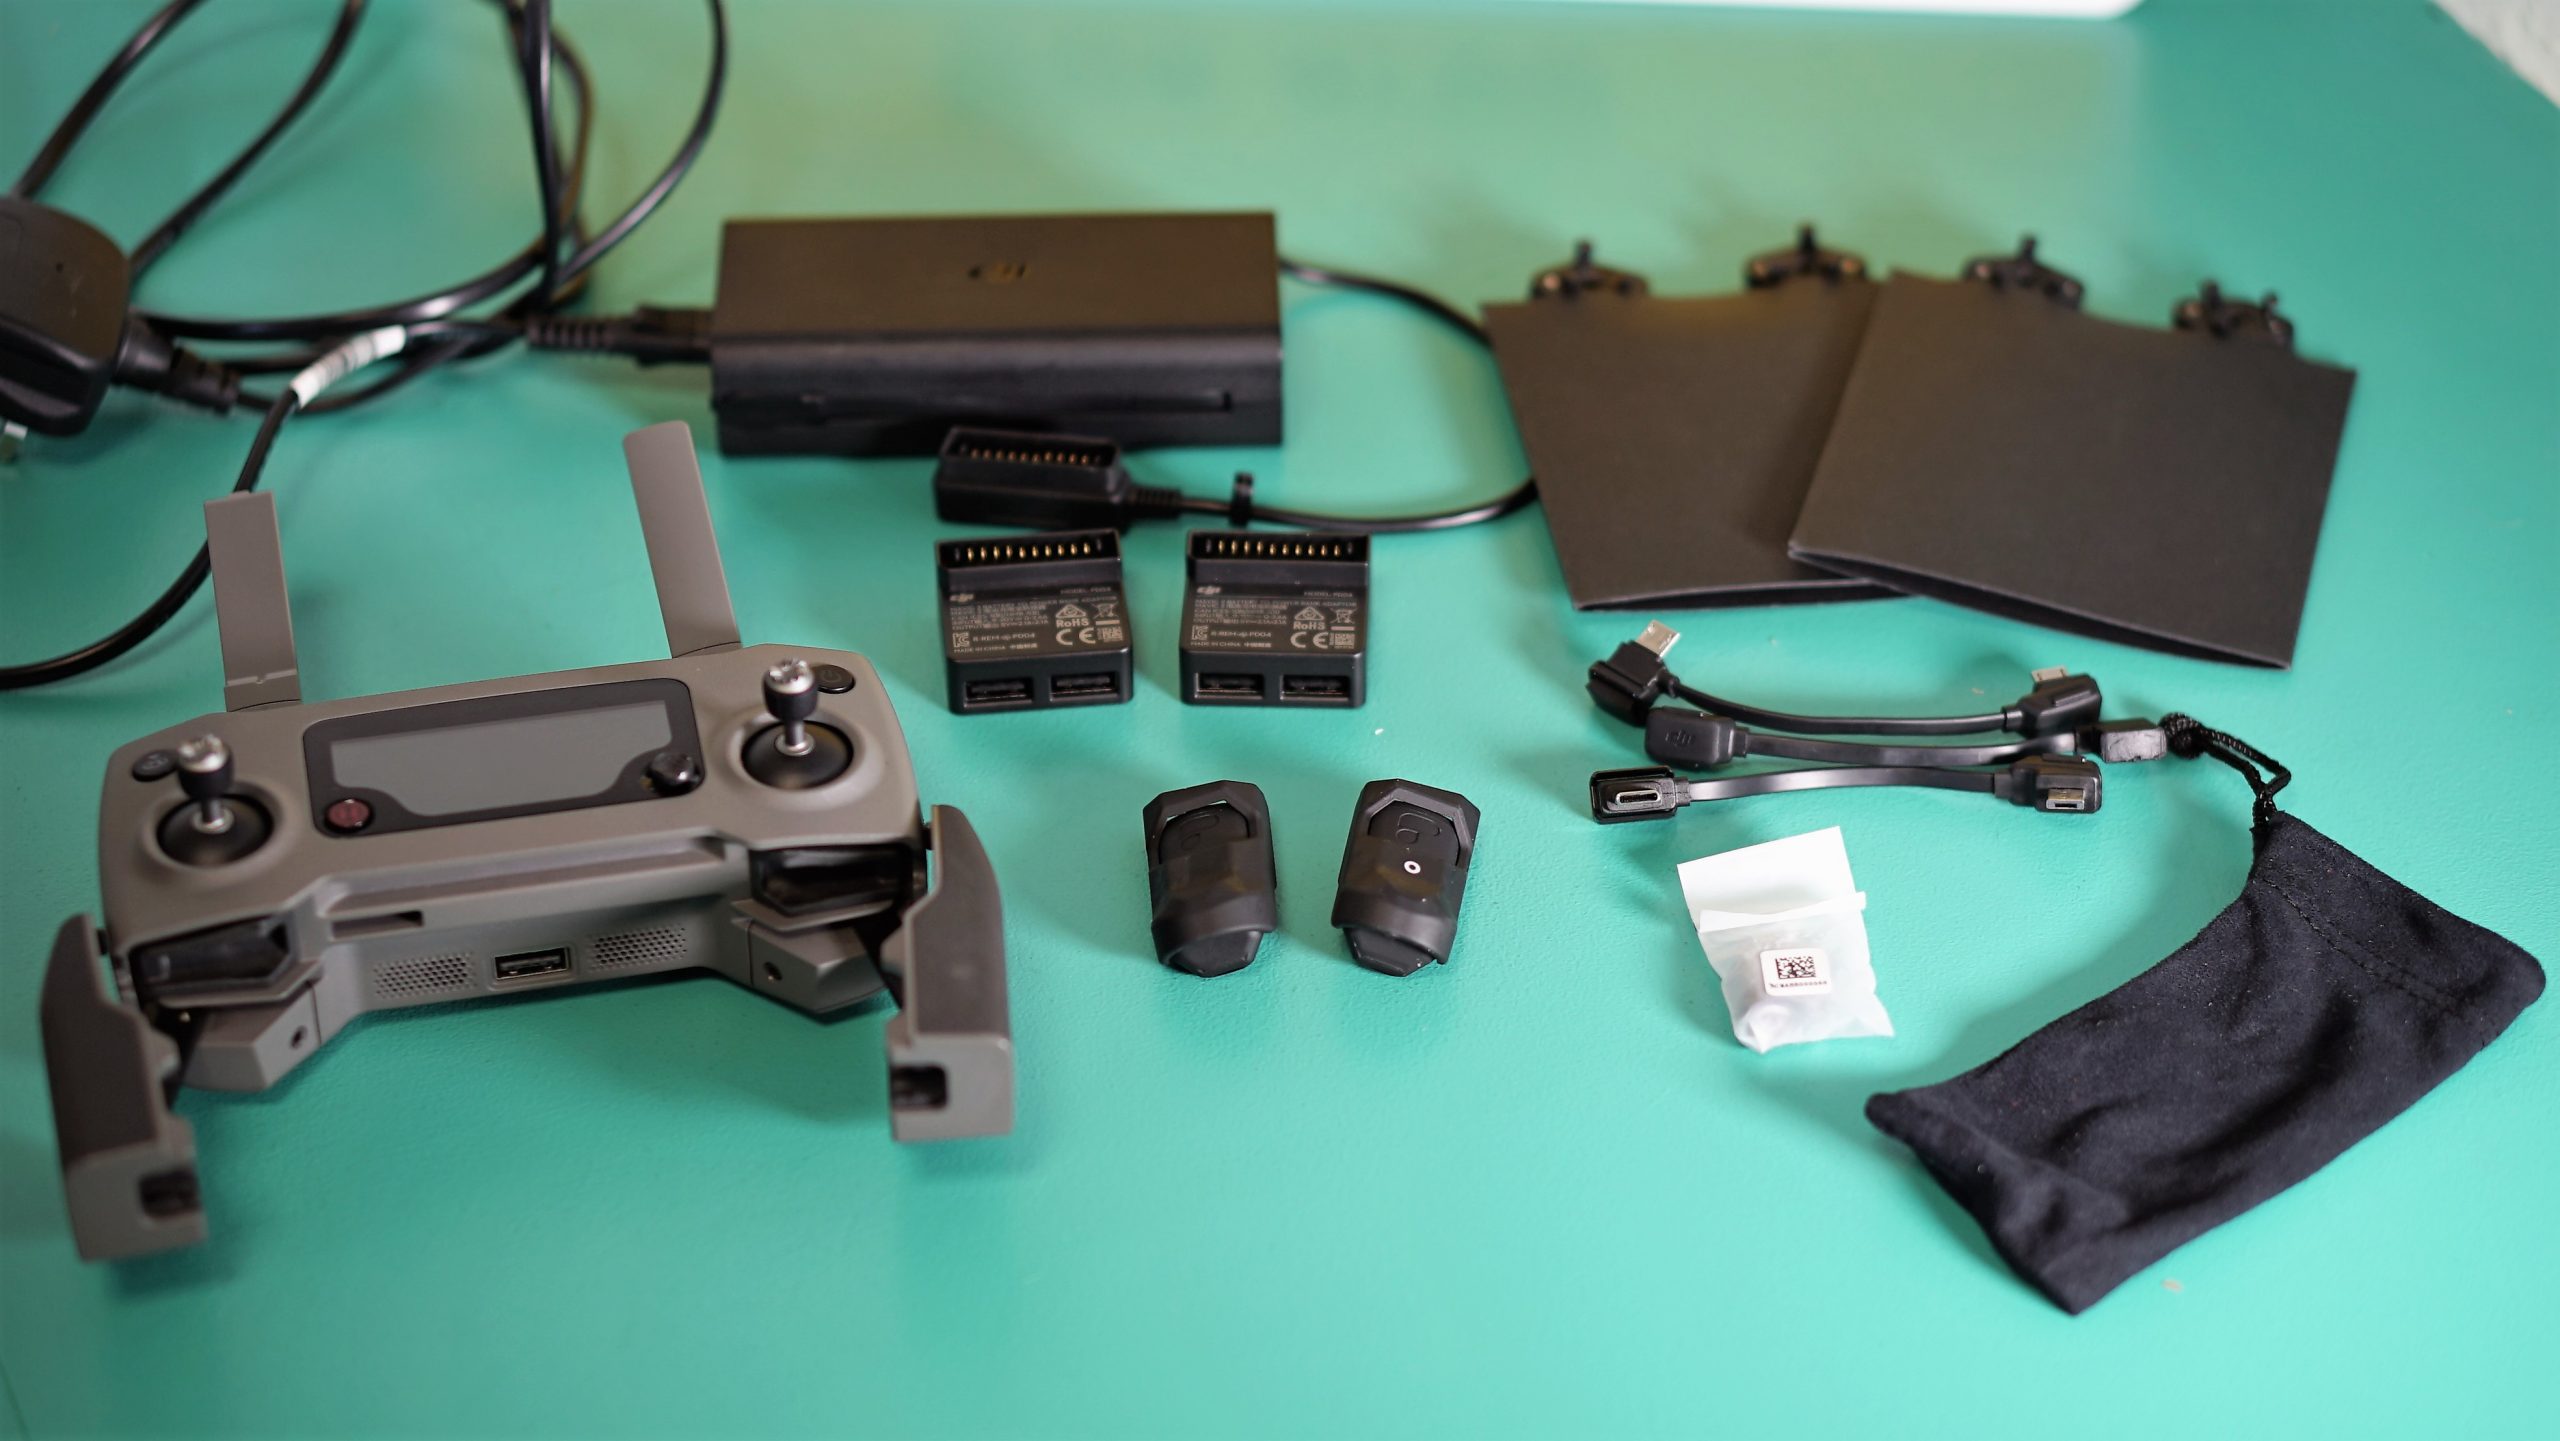 Used DJI Mavic 2 pro Fly more - Drone bundle and controller